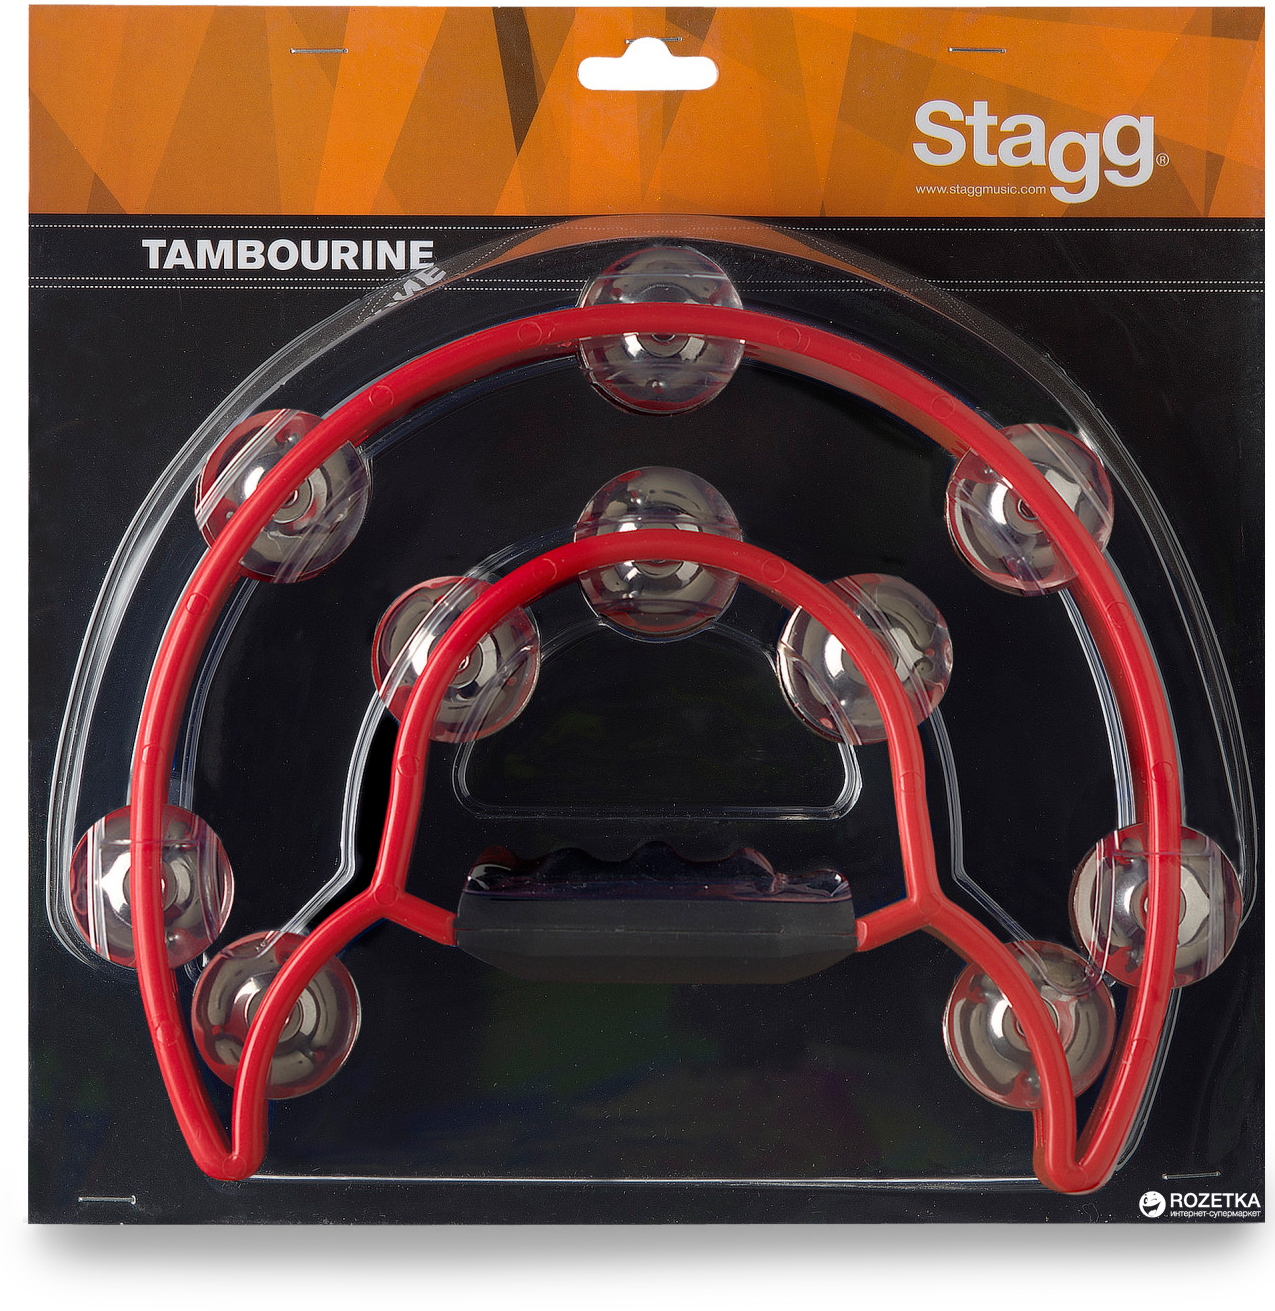 Stagg Tab-1 Rd Tambourin En Plastique Avec 20 Cymbalettes Rouge - Percussie te schudden - Variation 1